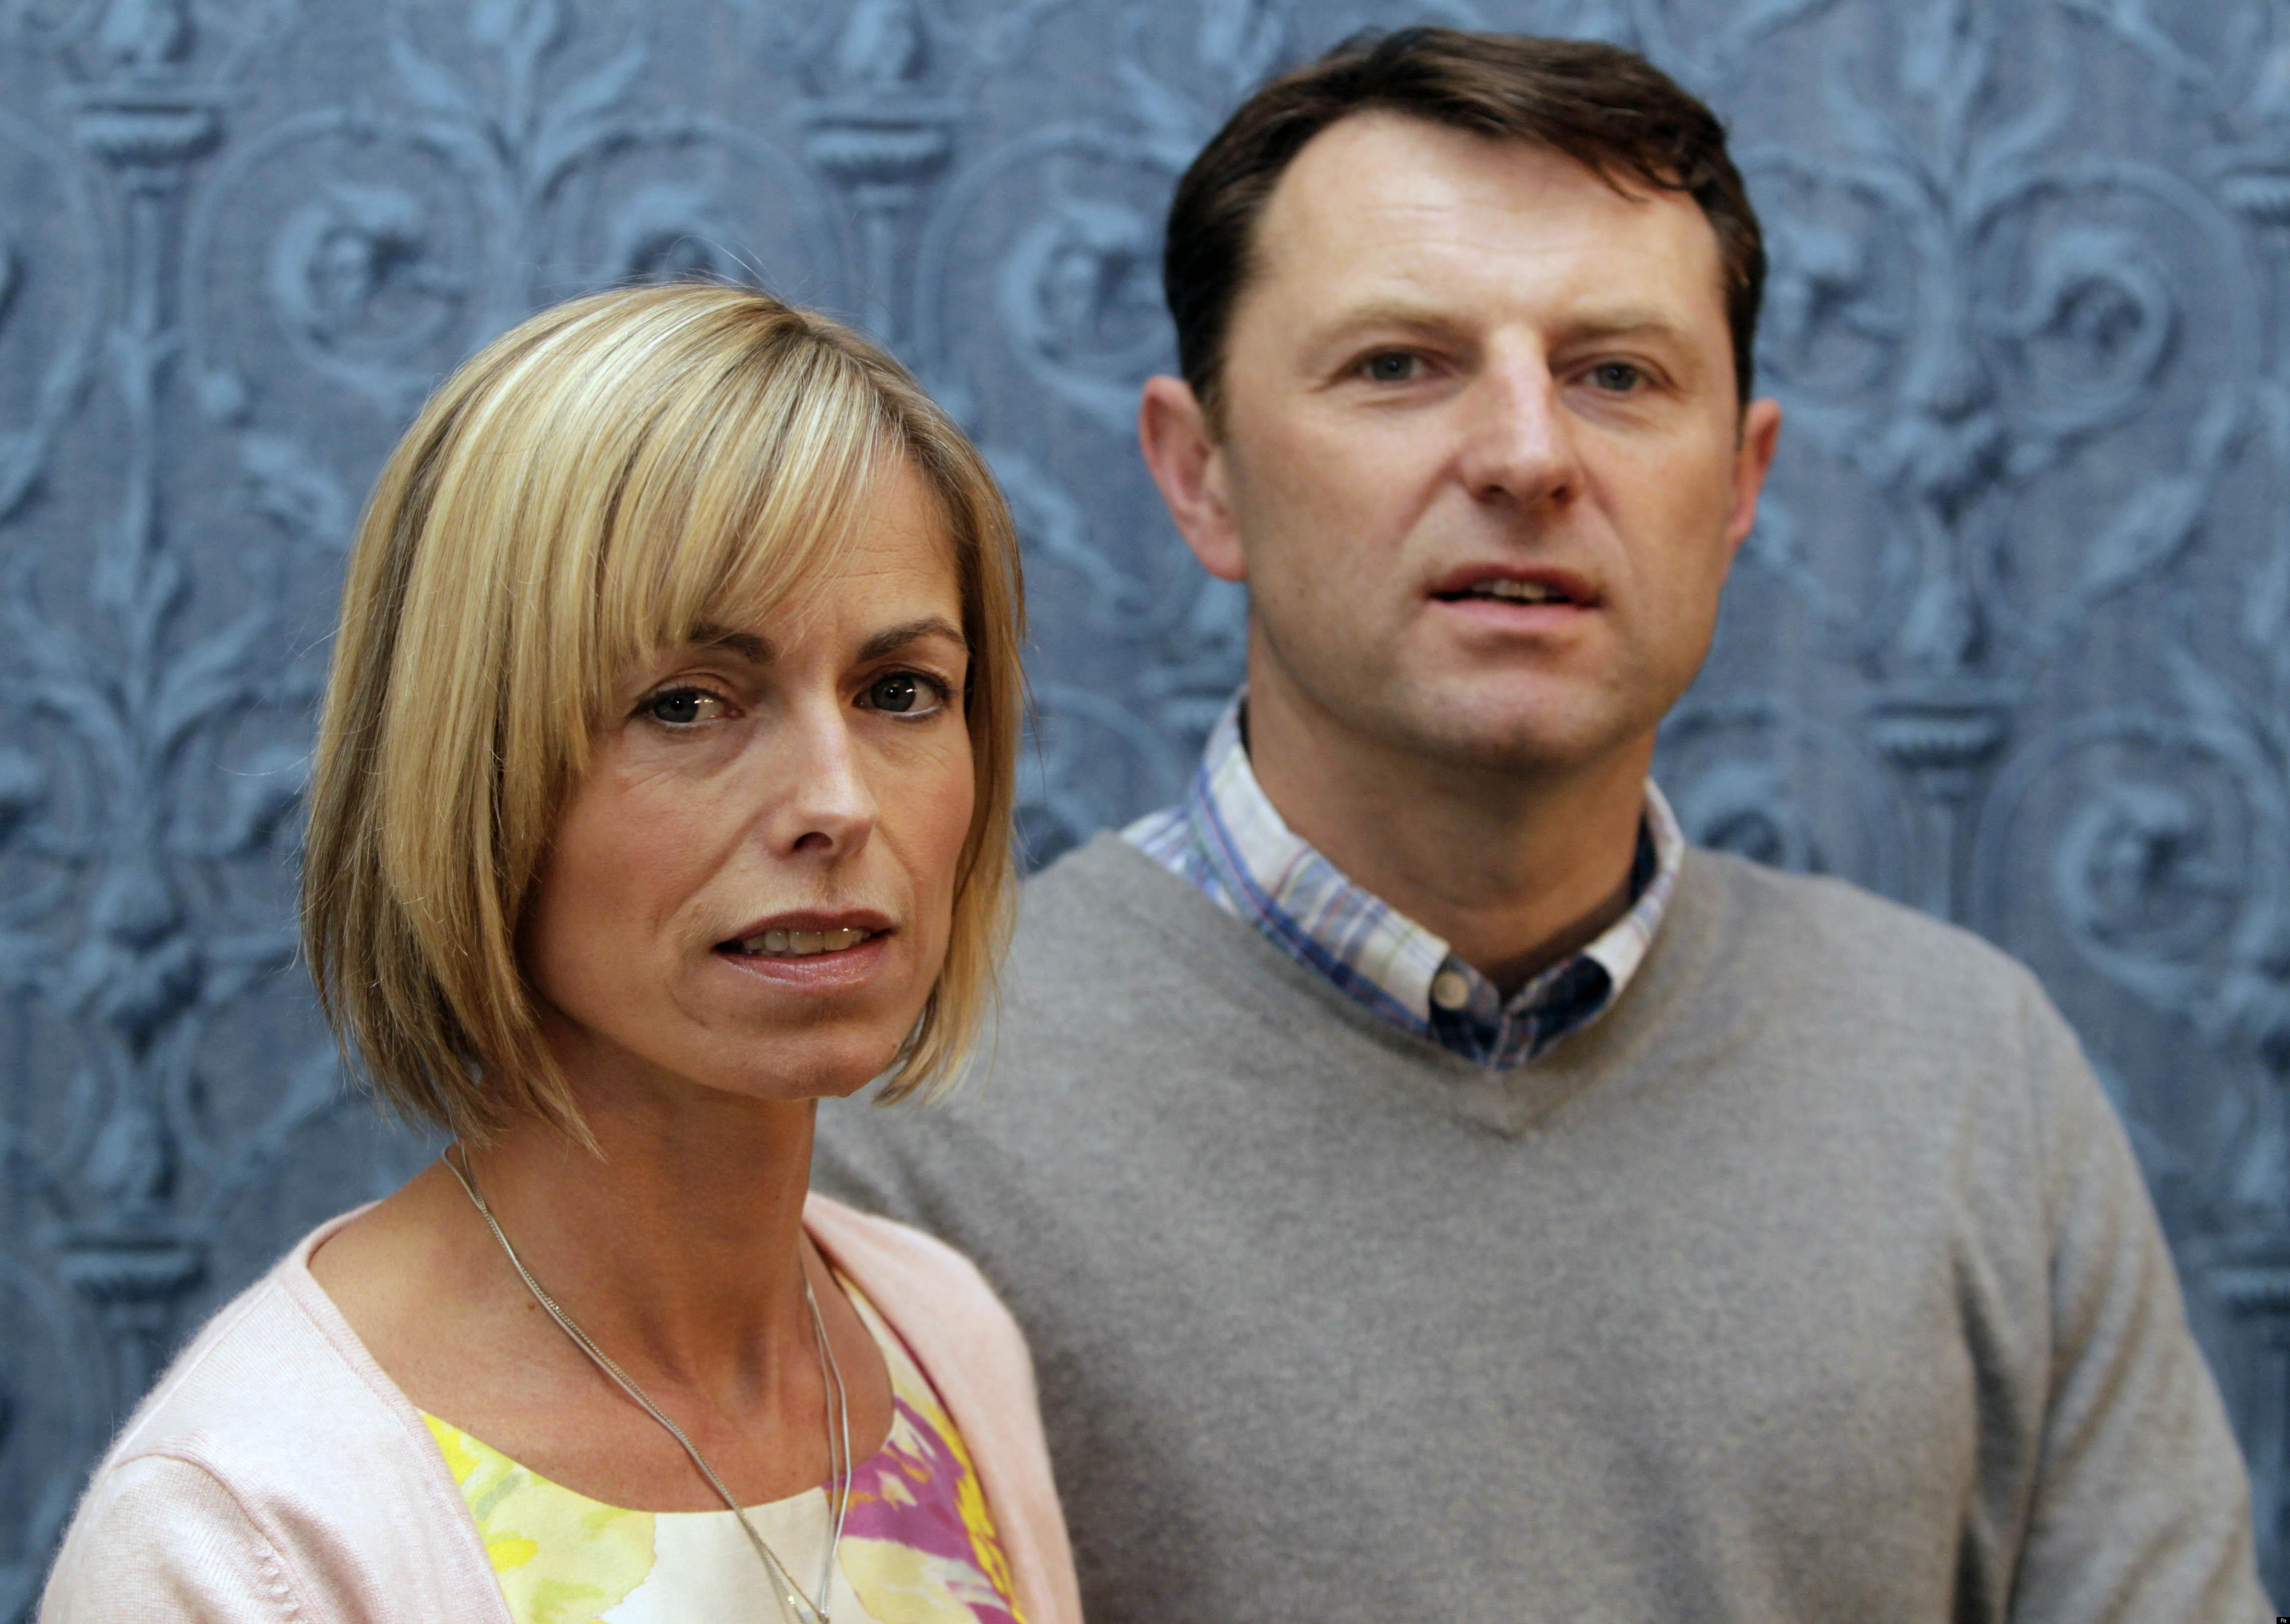 Madeleine McCann: Do You Hold Missing Piece Of The Puzzle? Ask Kate And